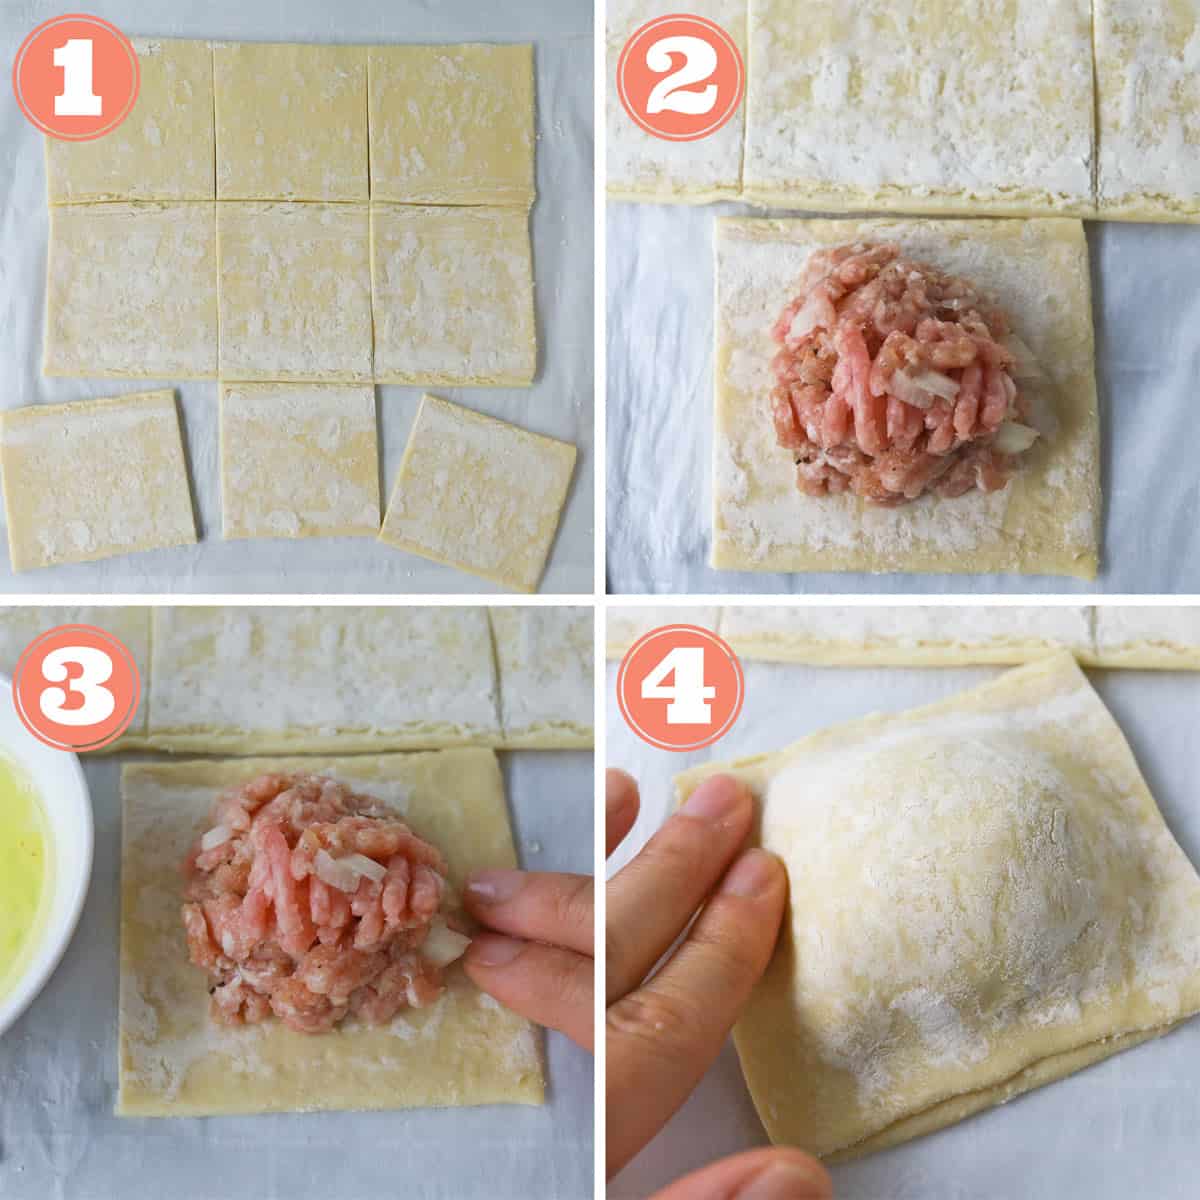 Step by step grid. Box one, cute square pastry. Box two, meat filling placed in middle of pastry. Box 3 adding egg whites to edges of pastry with fingers. Box 4 sealing pastry edges with finger. 